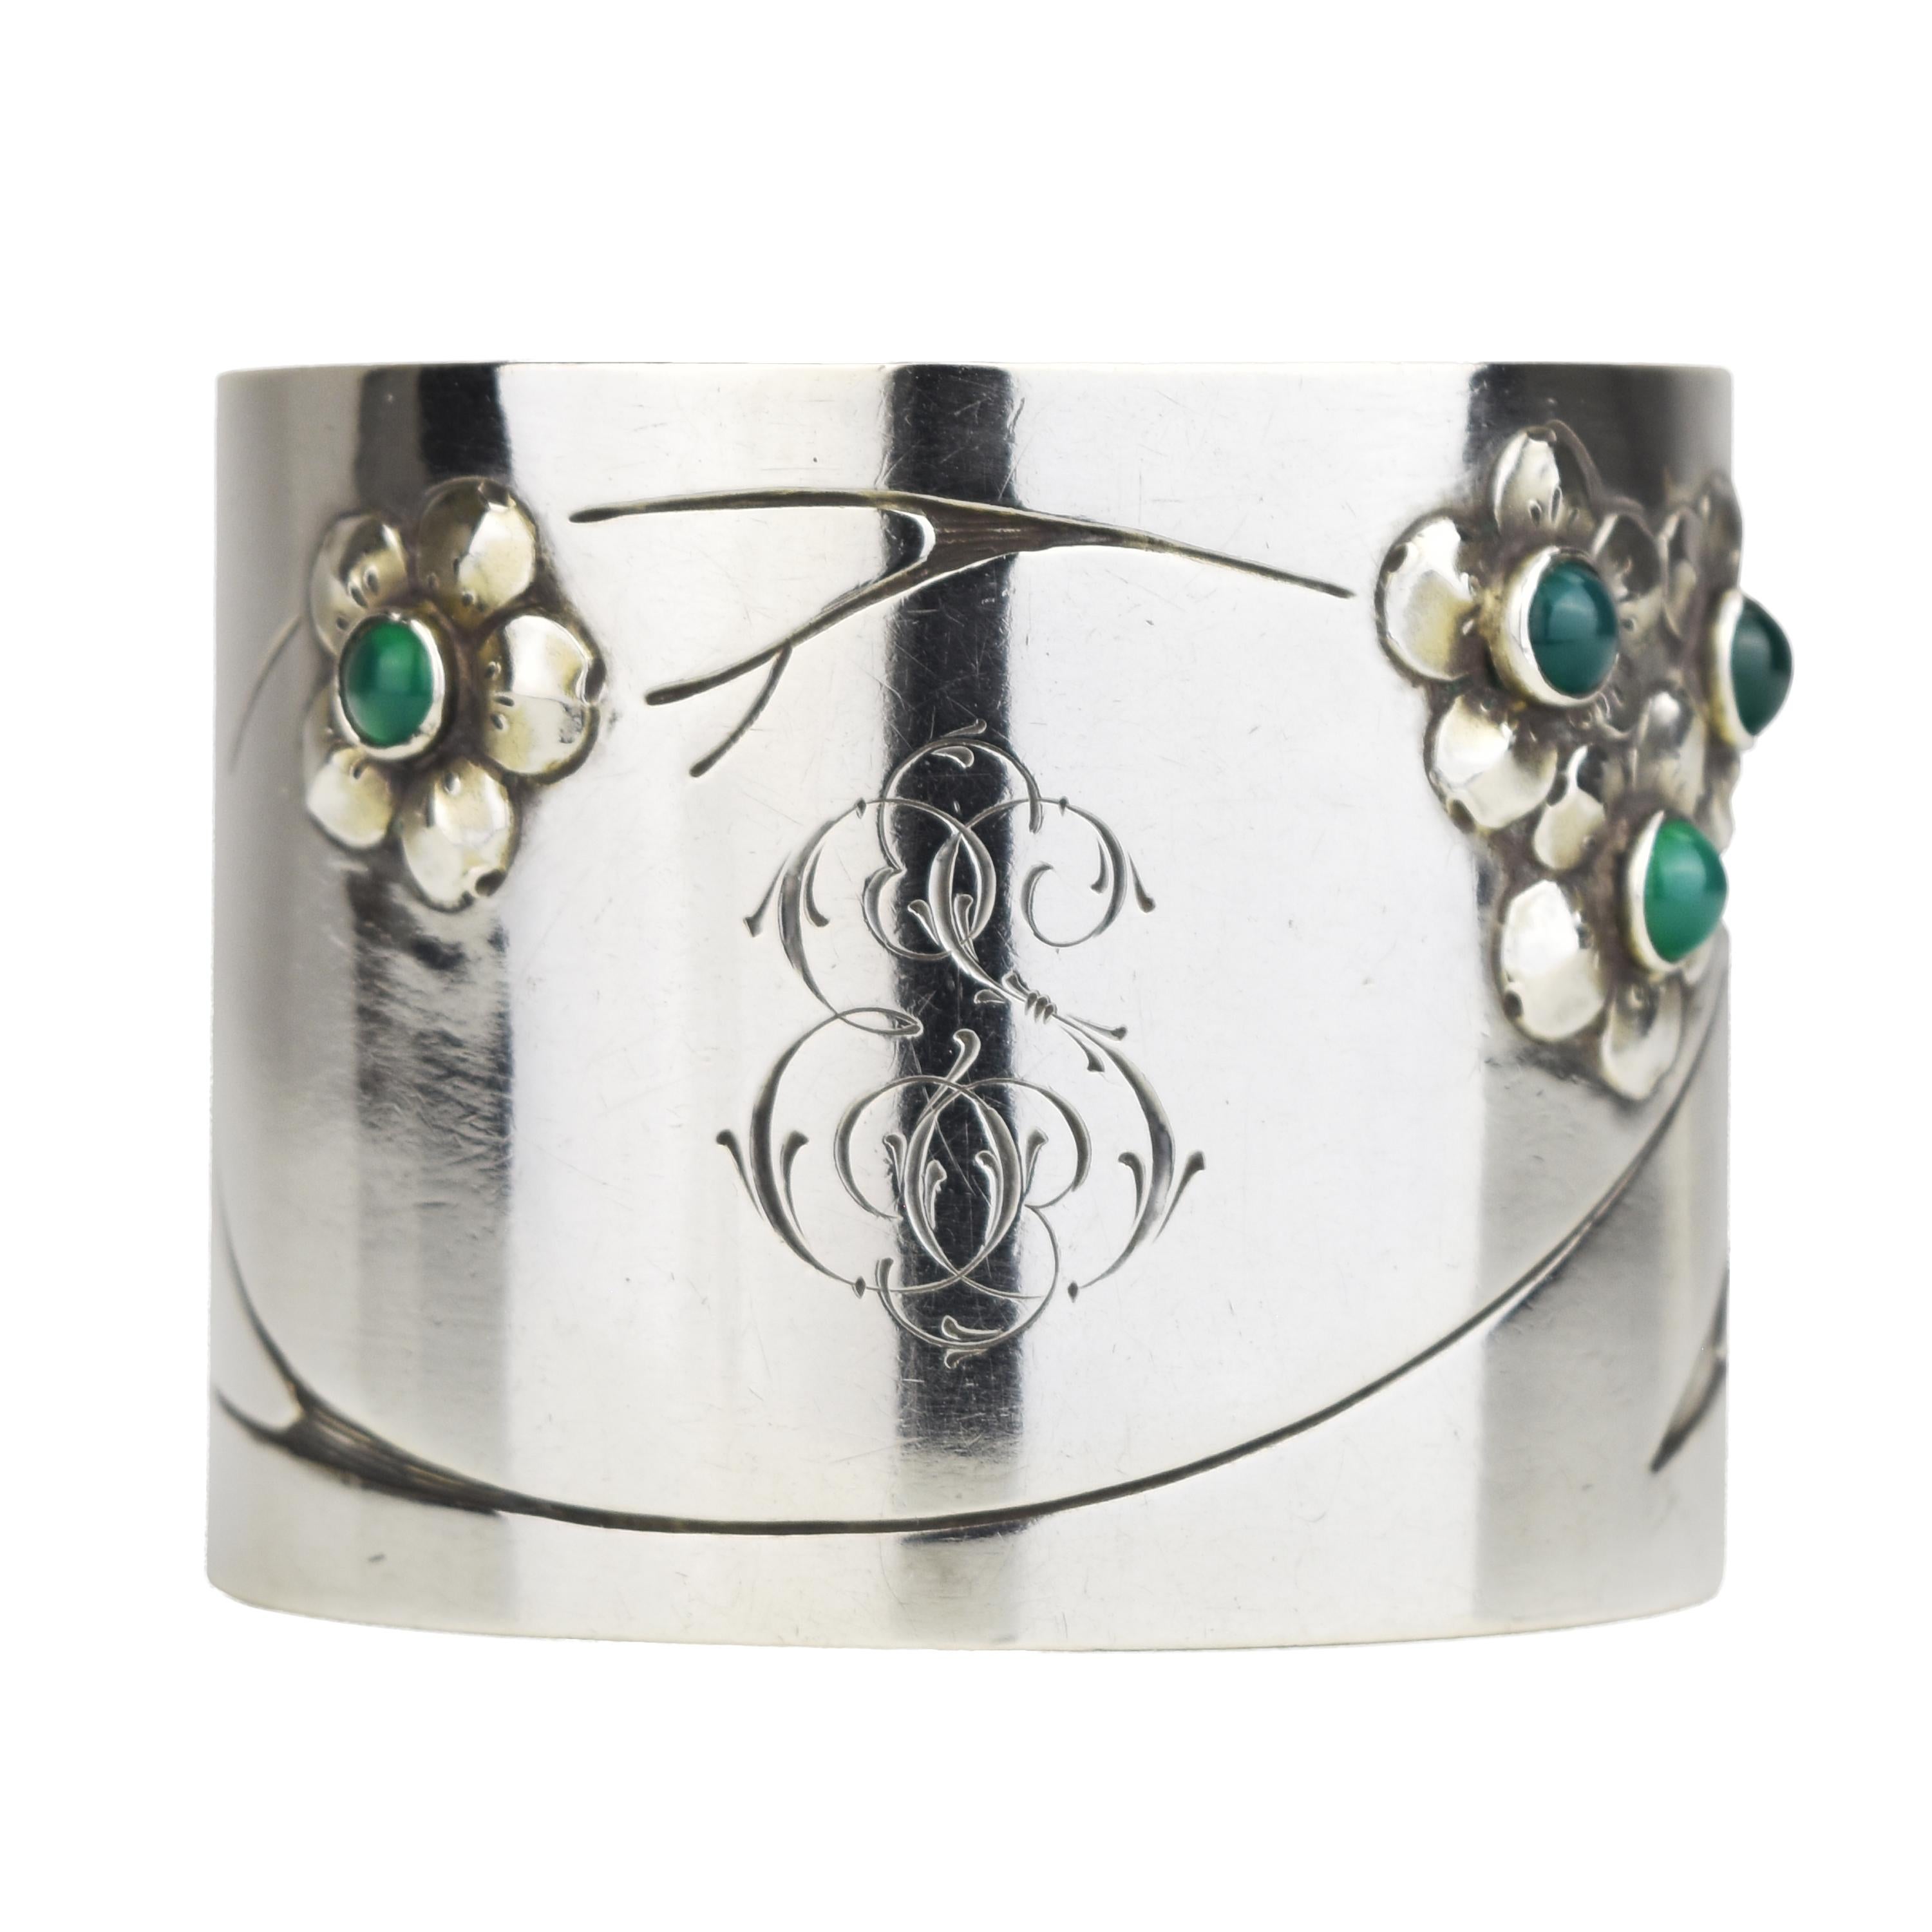 The antique Art Nouveau German 0.800 silver napkin ring is a stunning and intricately crafted piece of silverware that reflects the elegance and artistic style of the Art Nouveau period. The 0.800 silver hallmark indicates the purity of the silver